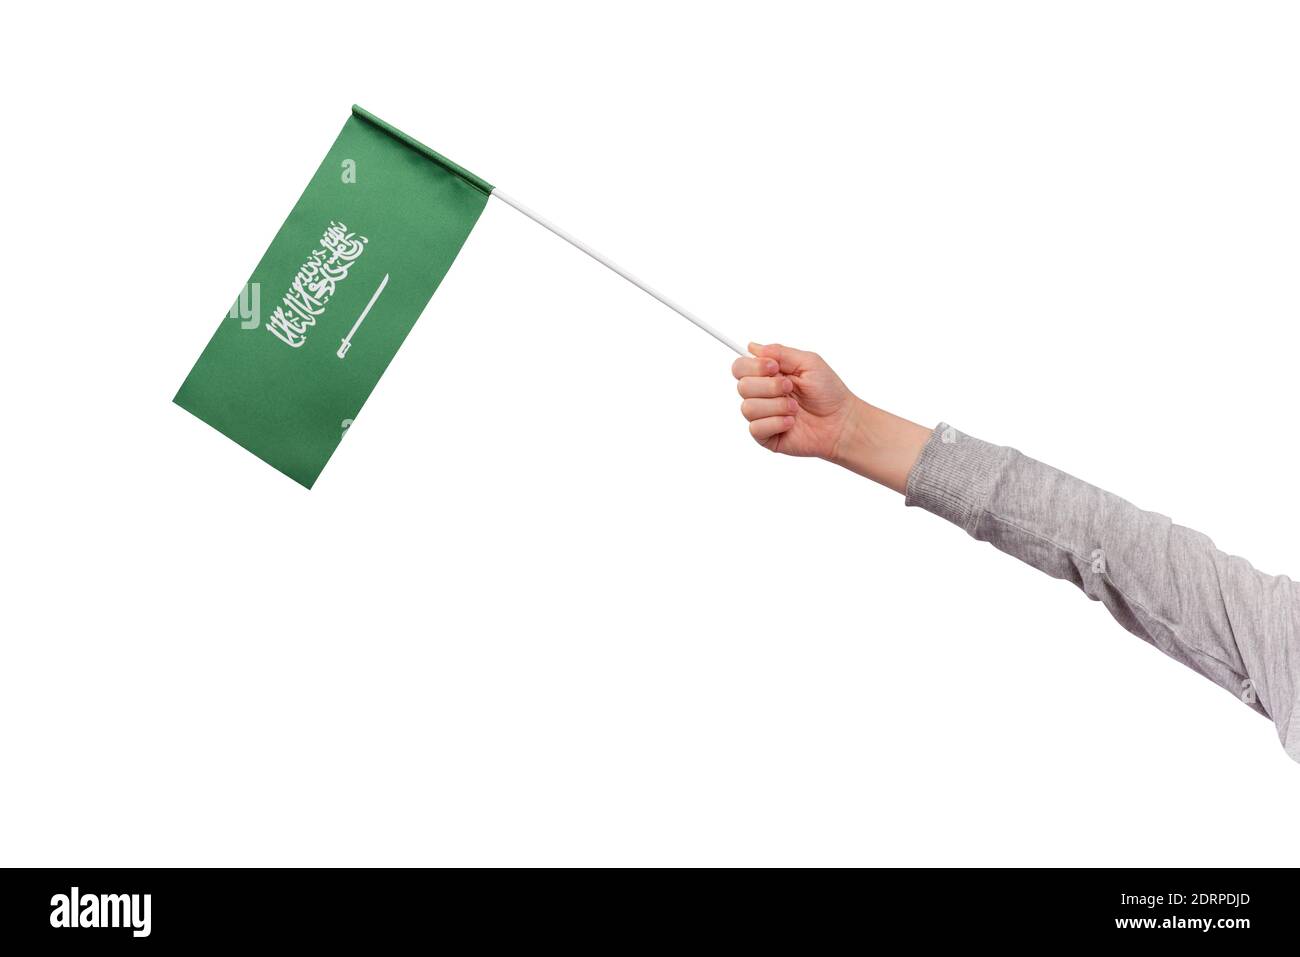 Child holds flag of Saudi Arabia isolated on white background. Green flag with sword. Stock Photo